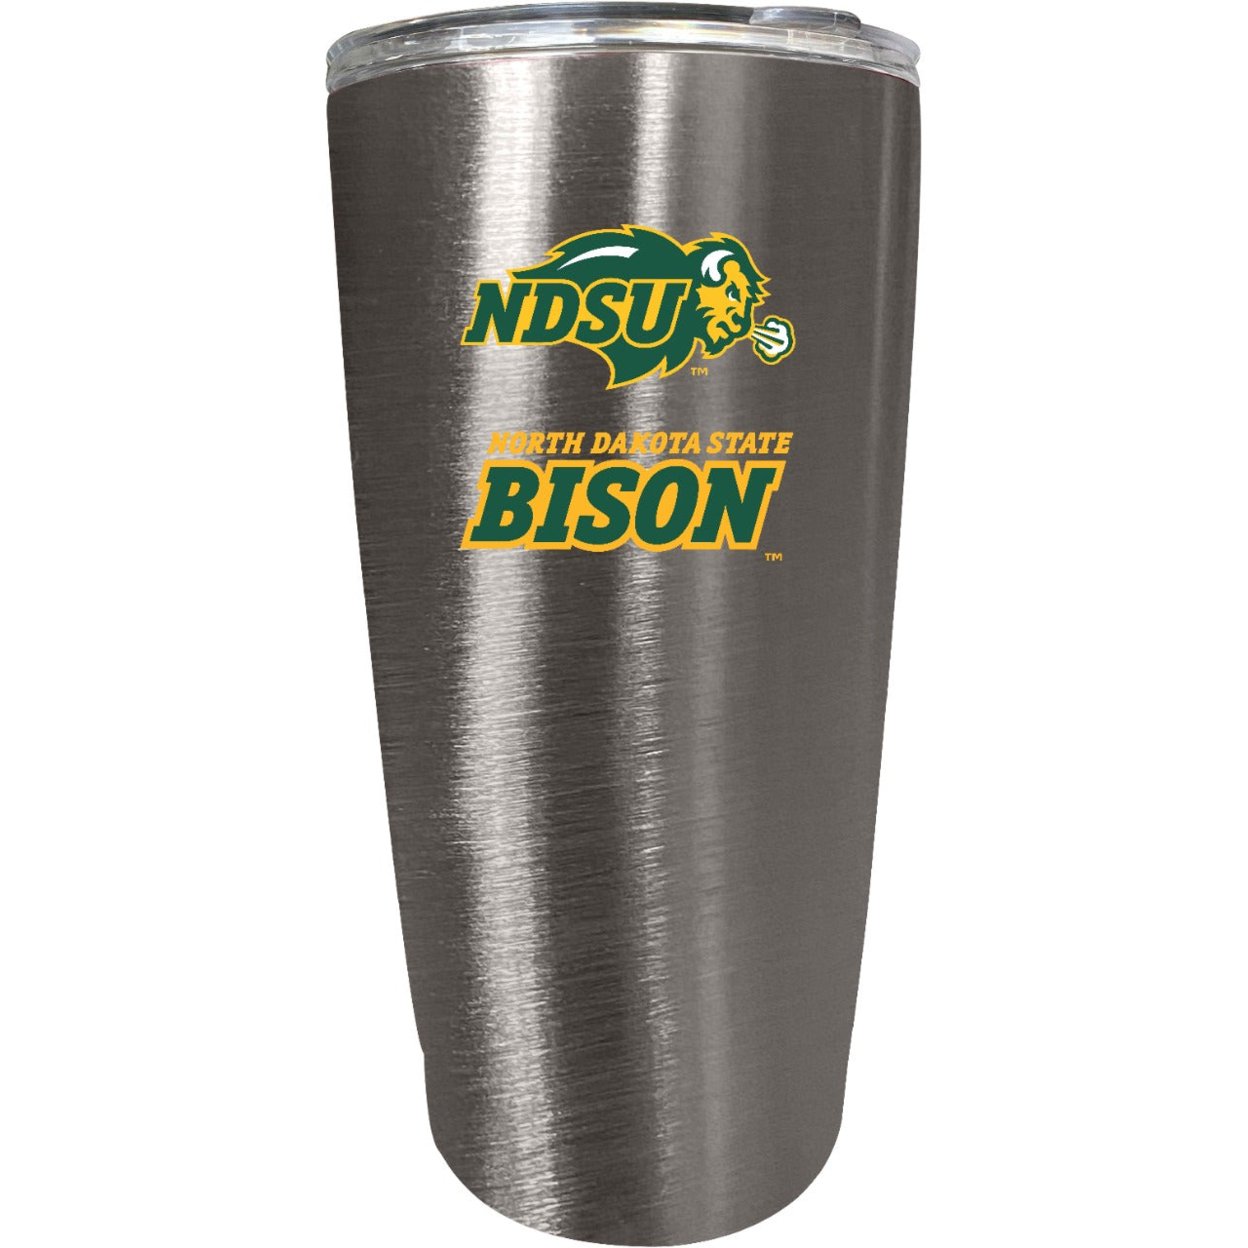 North Dakota State Bison 16 Oz Insulated Stainless Steel Tumbler Colorless